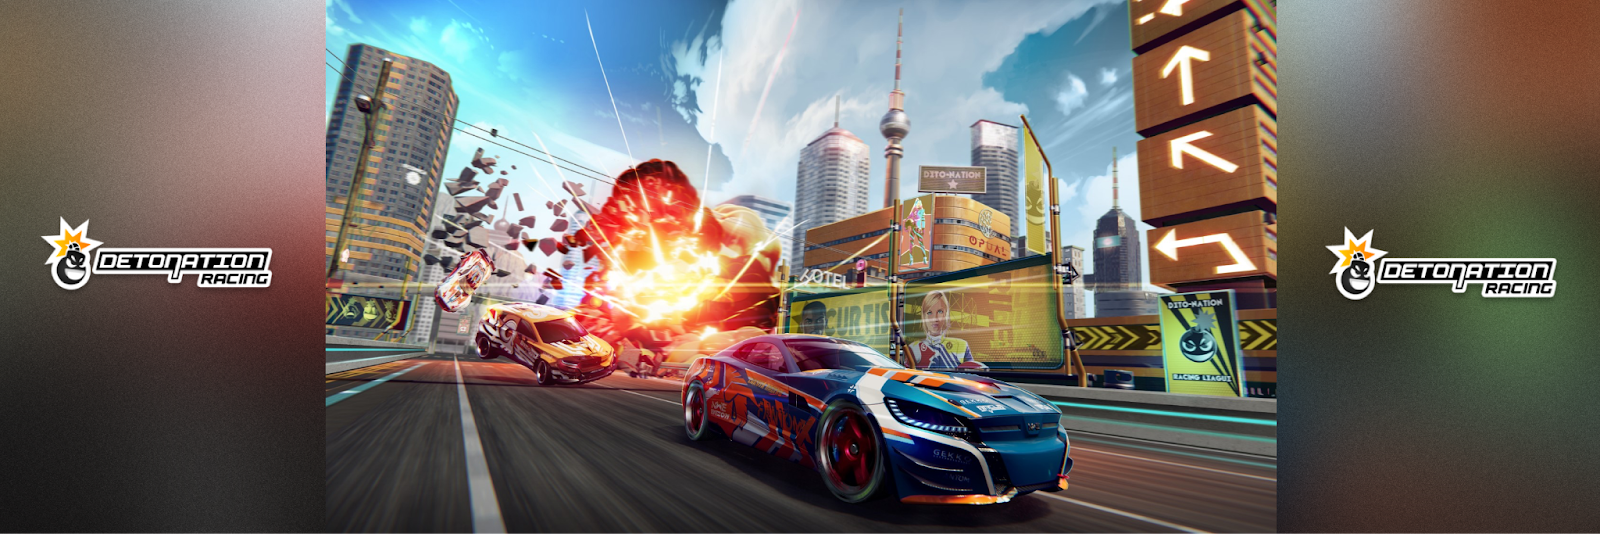 Electric Square leveraged many aspects of ECS for Unity to build their fast-paced Apple Arcade racing game, Detonation Racing.